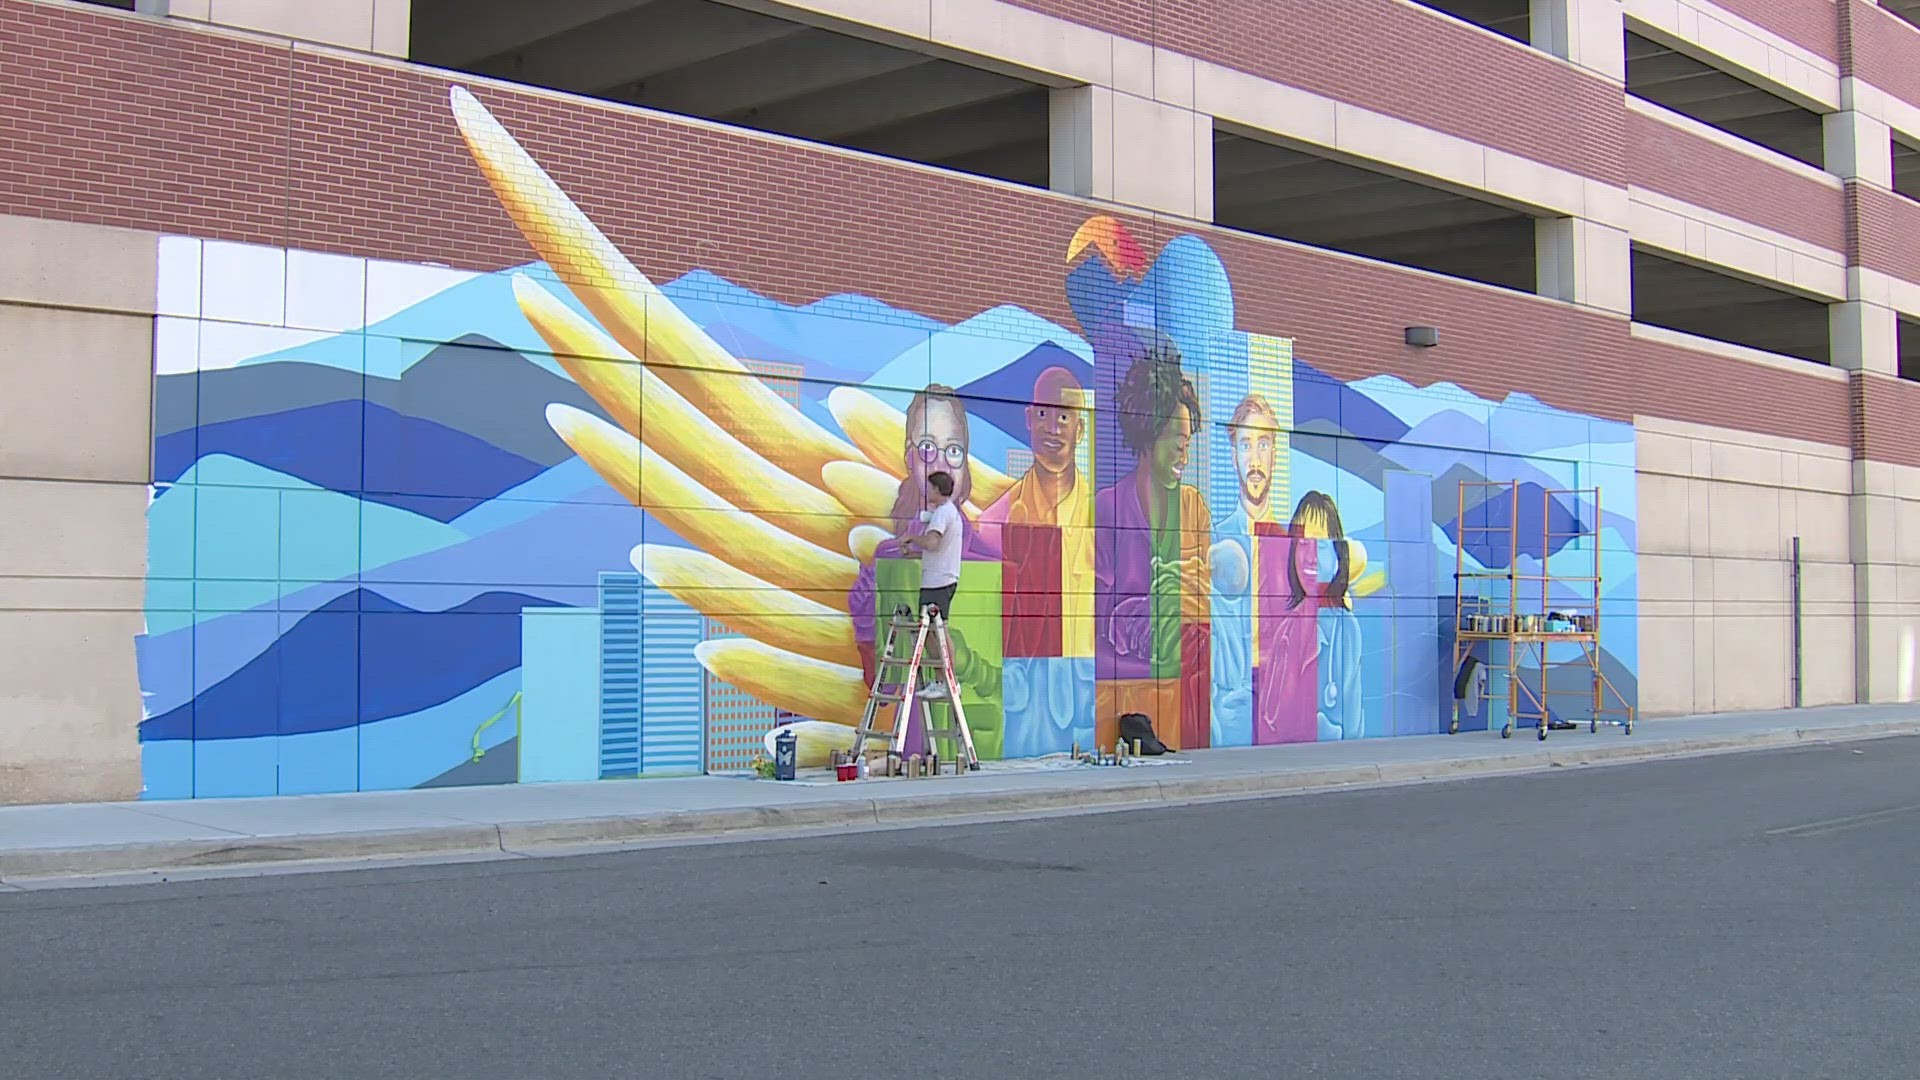 Artist Austin Zucchini-Fowler is working on a mural at the entrance to the outpatient medical center parking garage off Acoma Street.